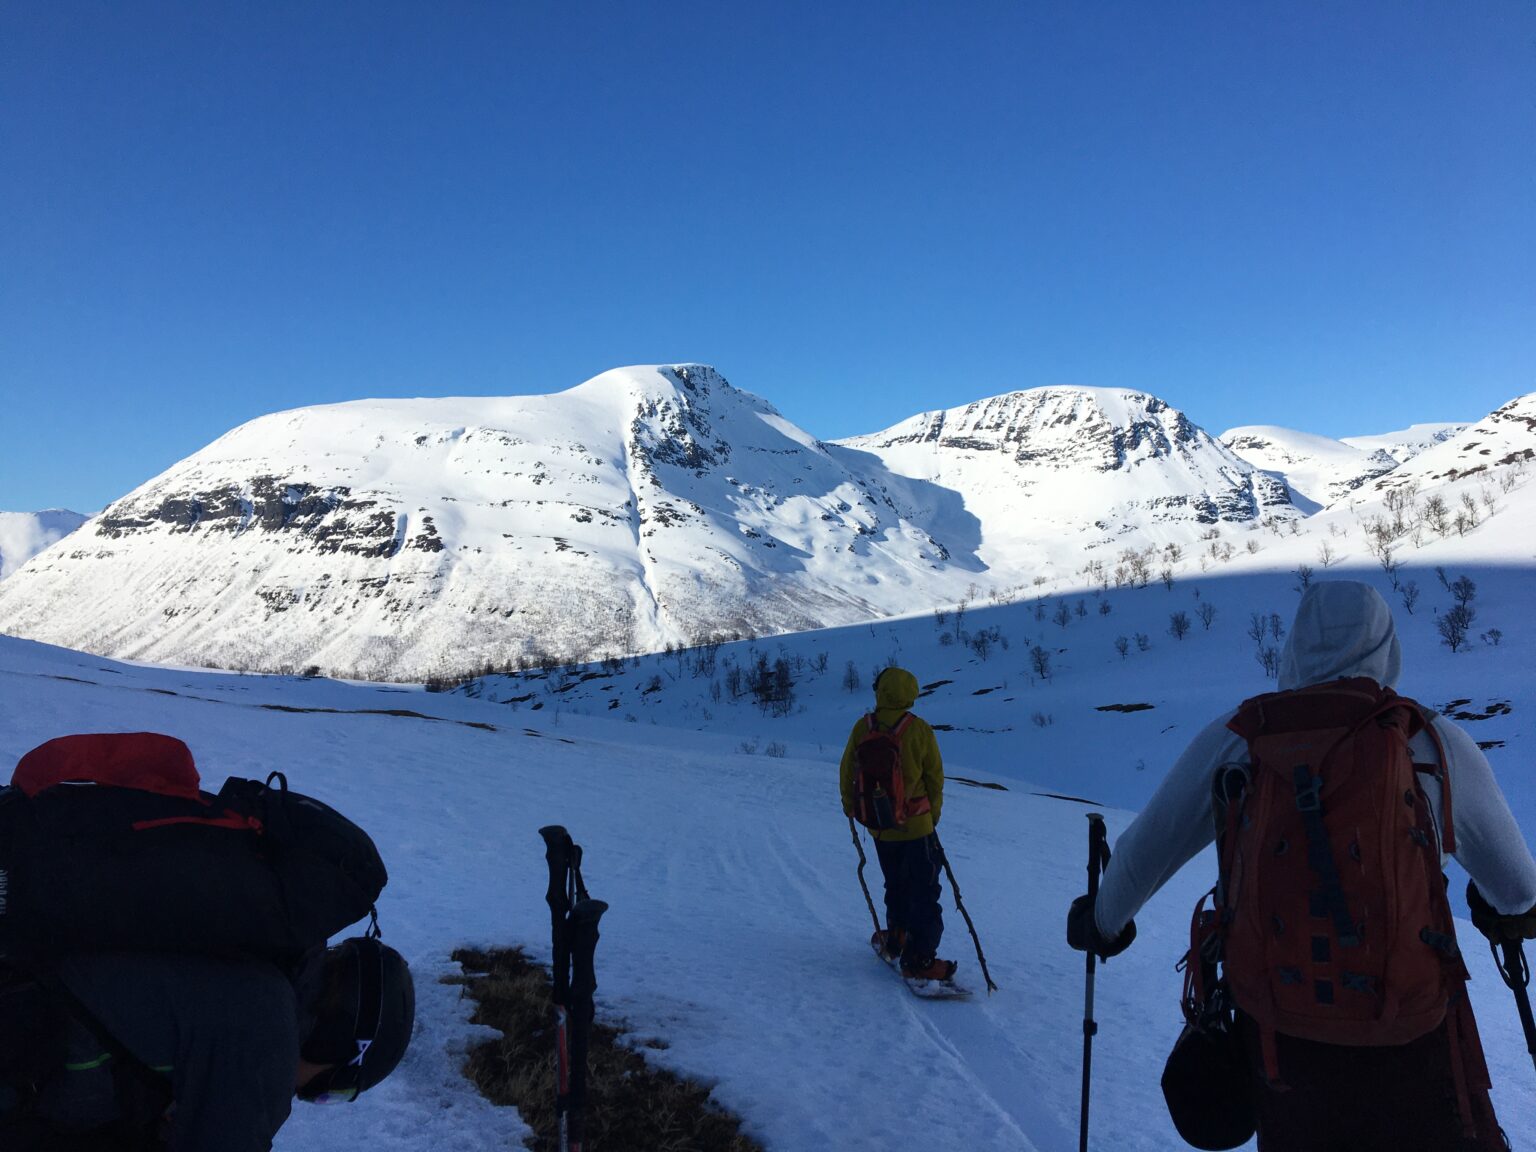 Snowboarding into the Finndalen Valley with the South gully of Tamokfjellet in the background